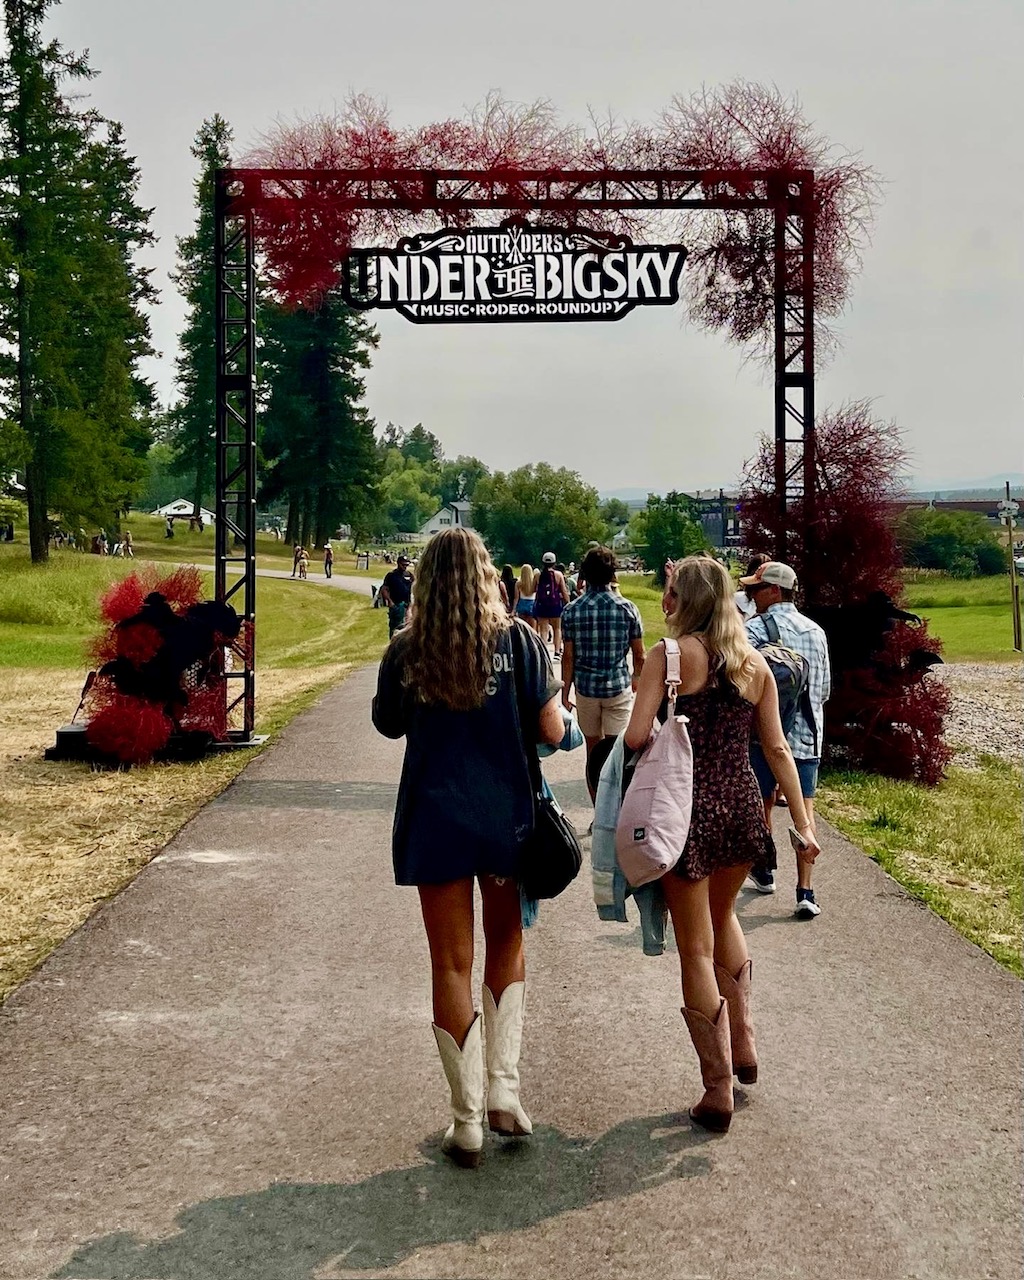 One of the two entrances to Under the Big Sky Fest.